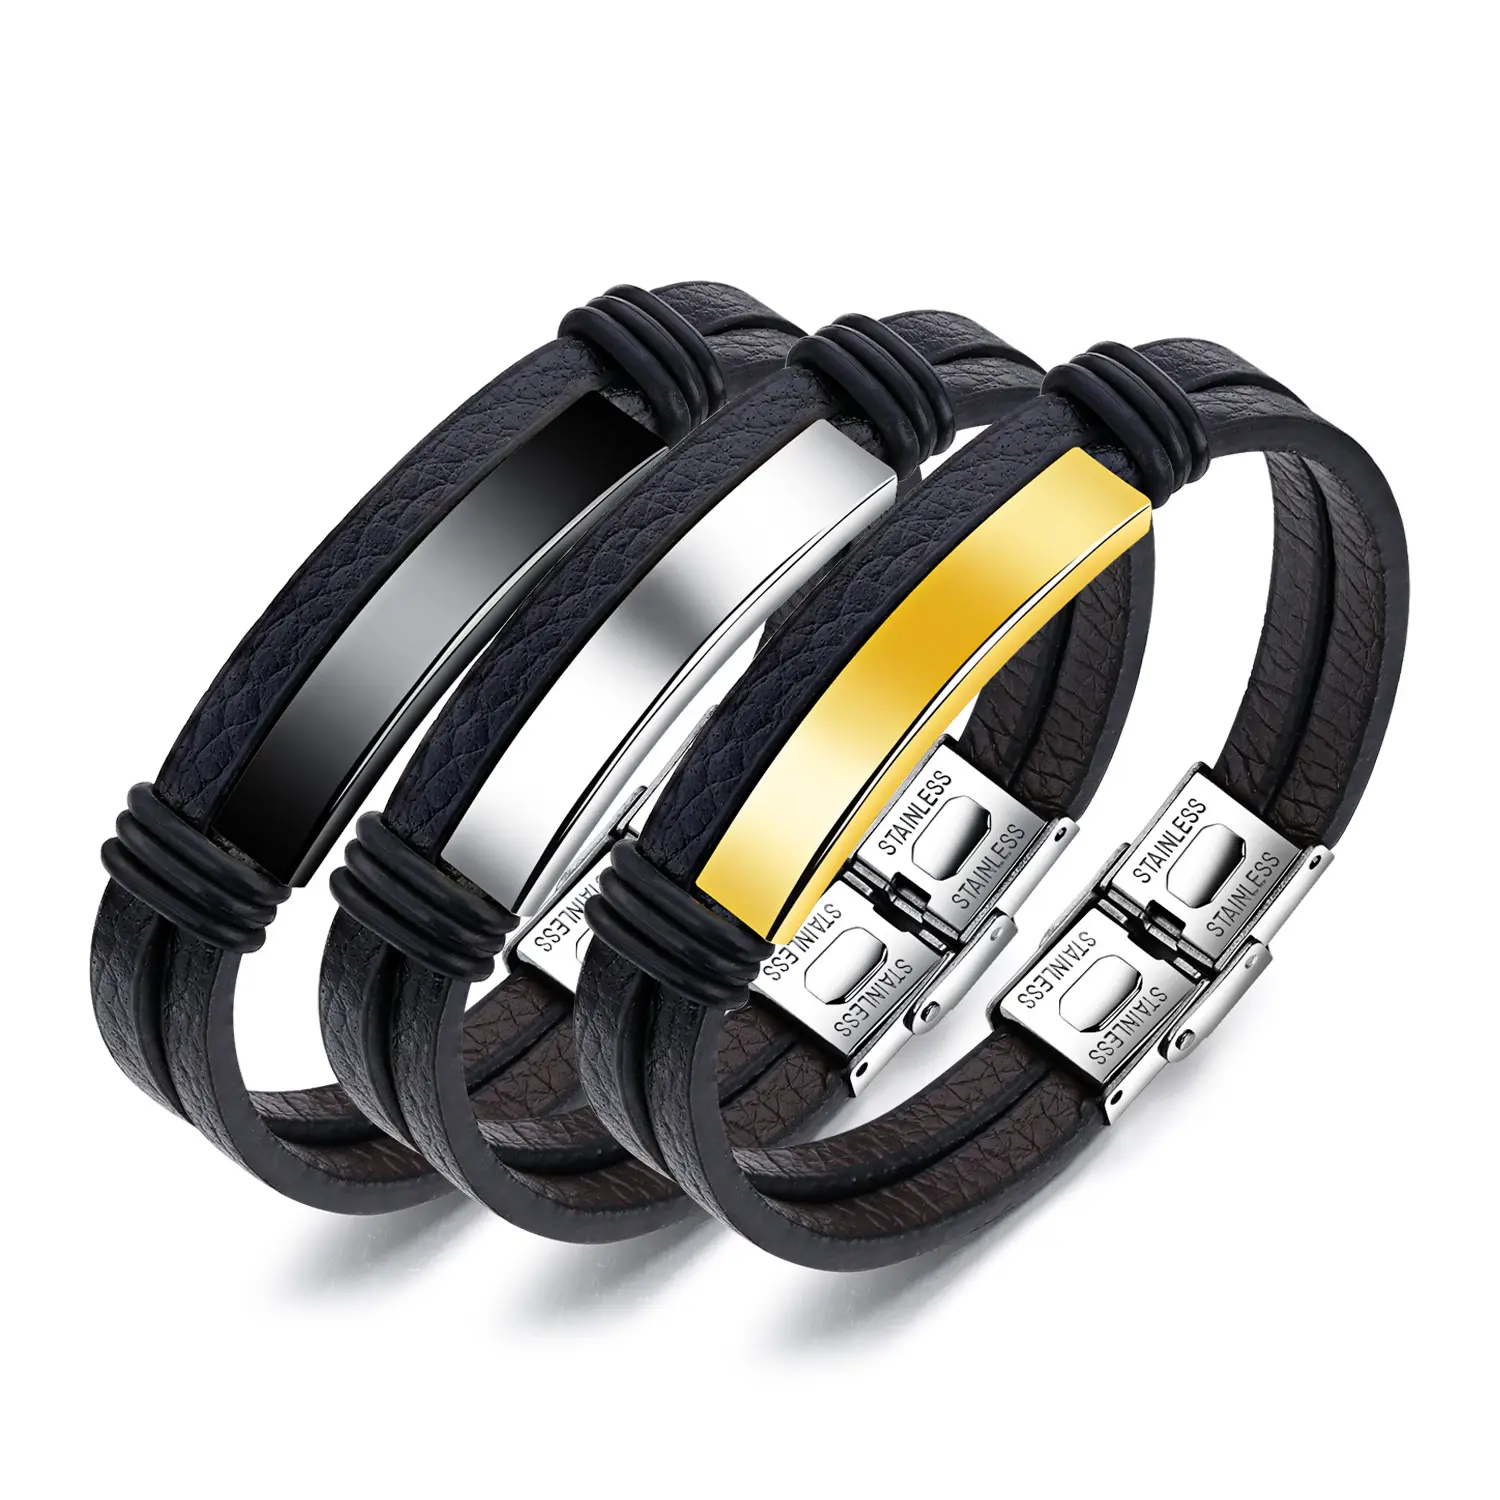 Duoying Drop Shipping Creative black stainless steel men's bracelet double layer student hand jewelry Leather Bracelet